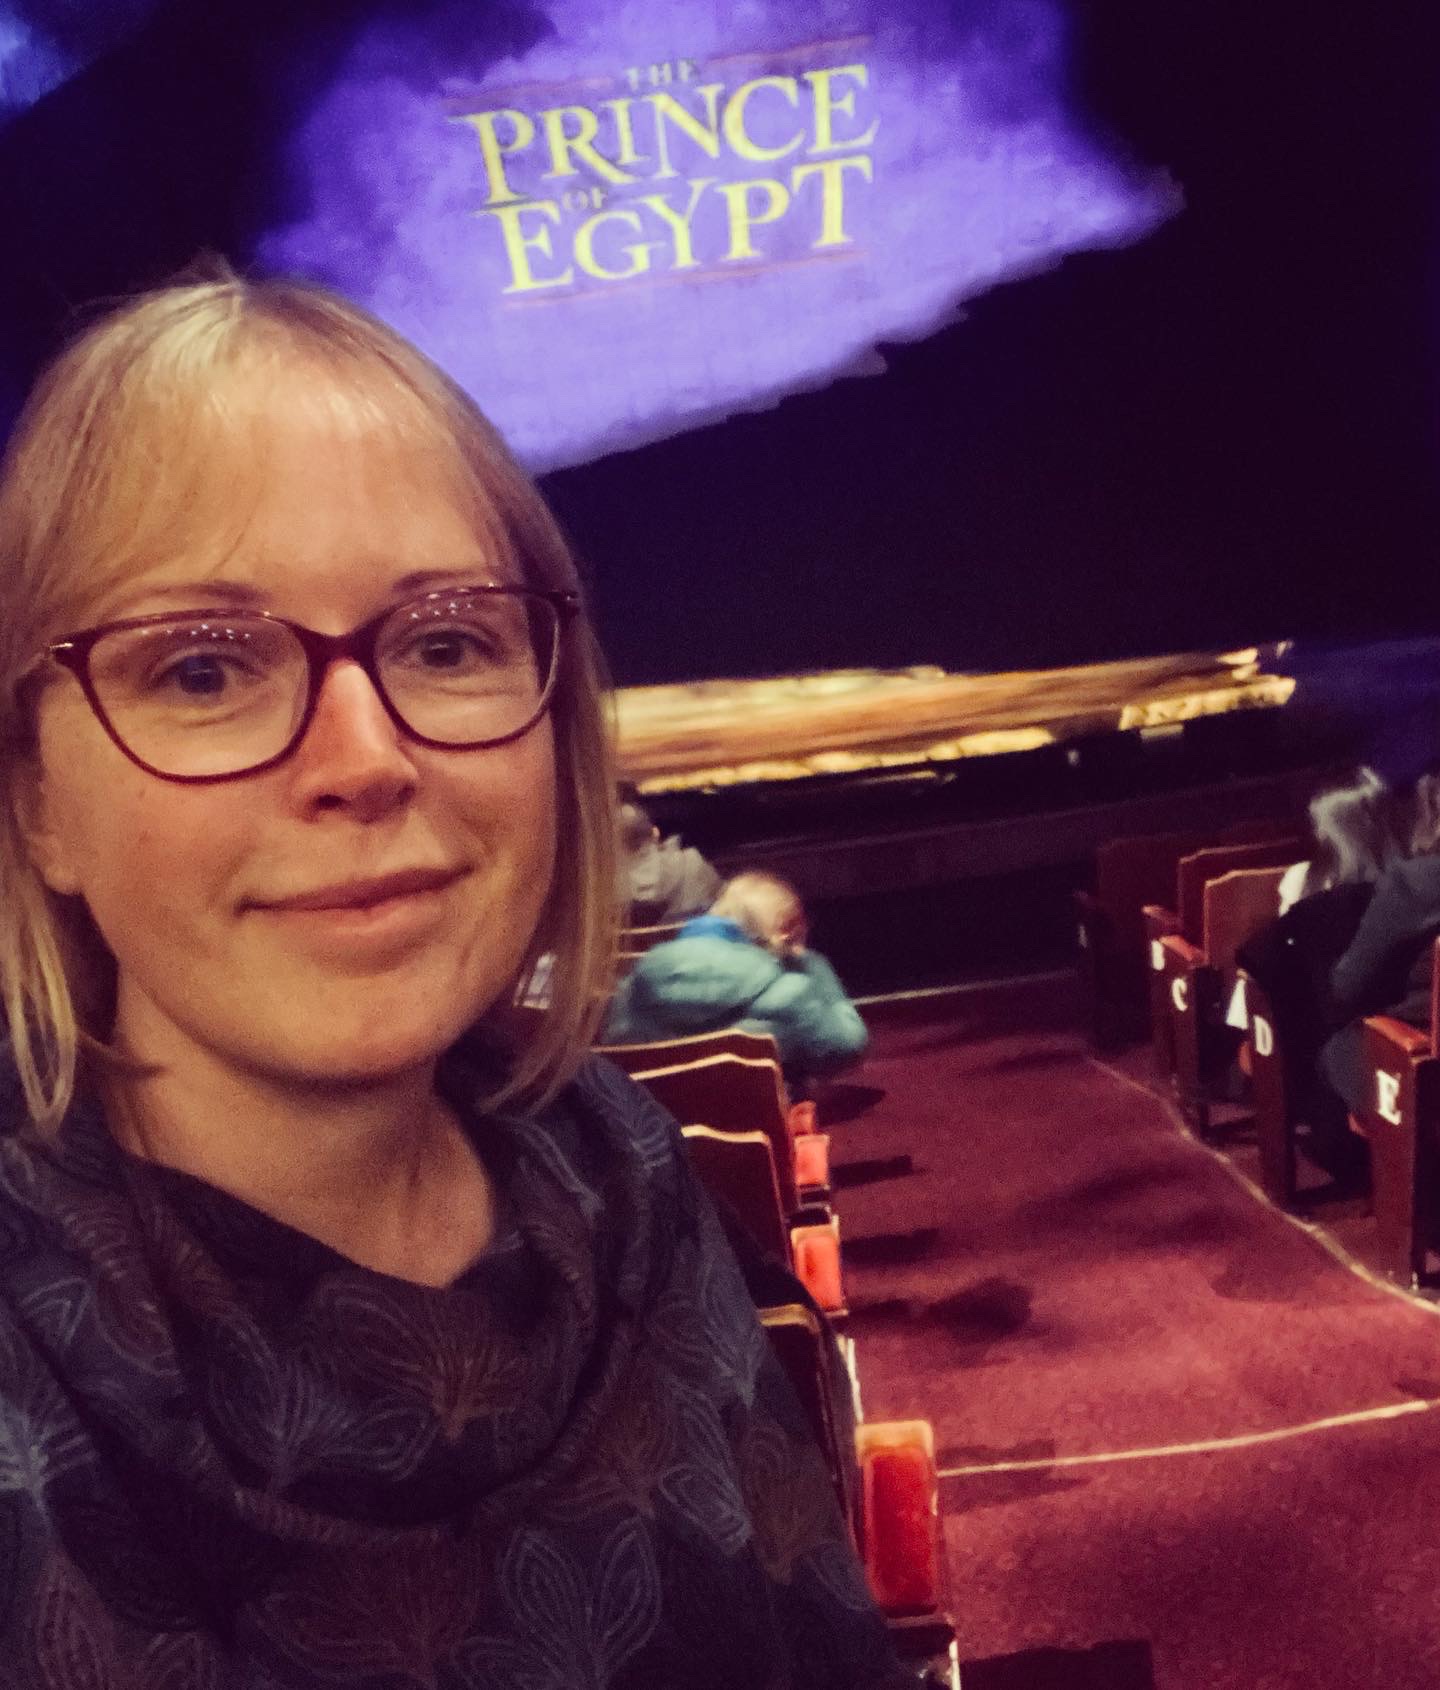 The Prince of Egypt review